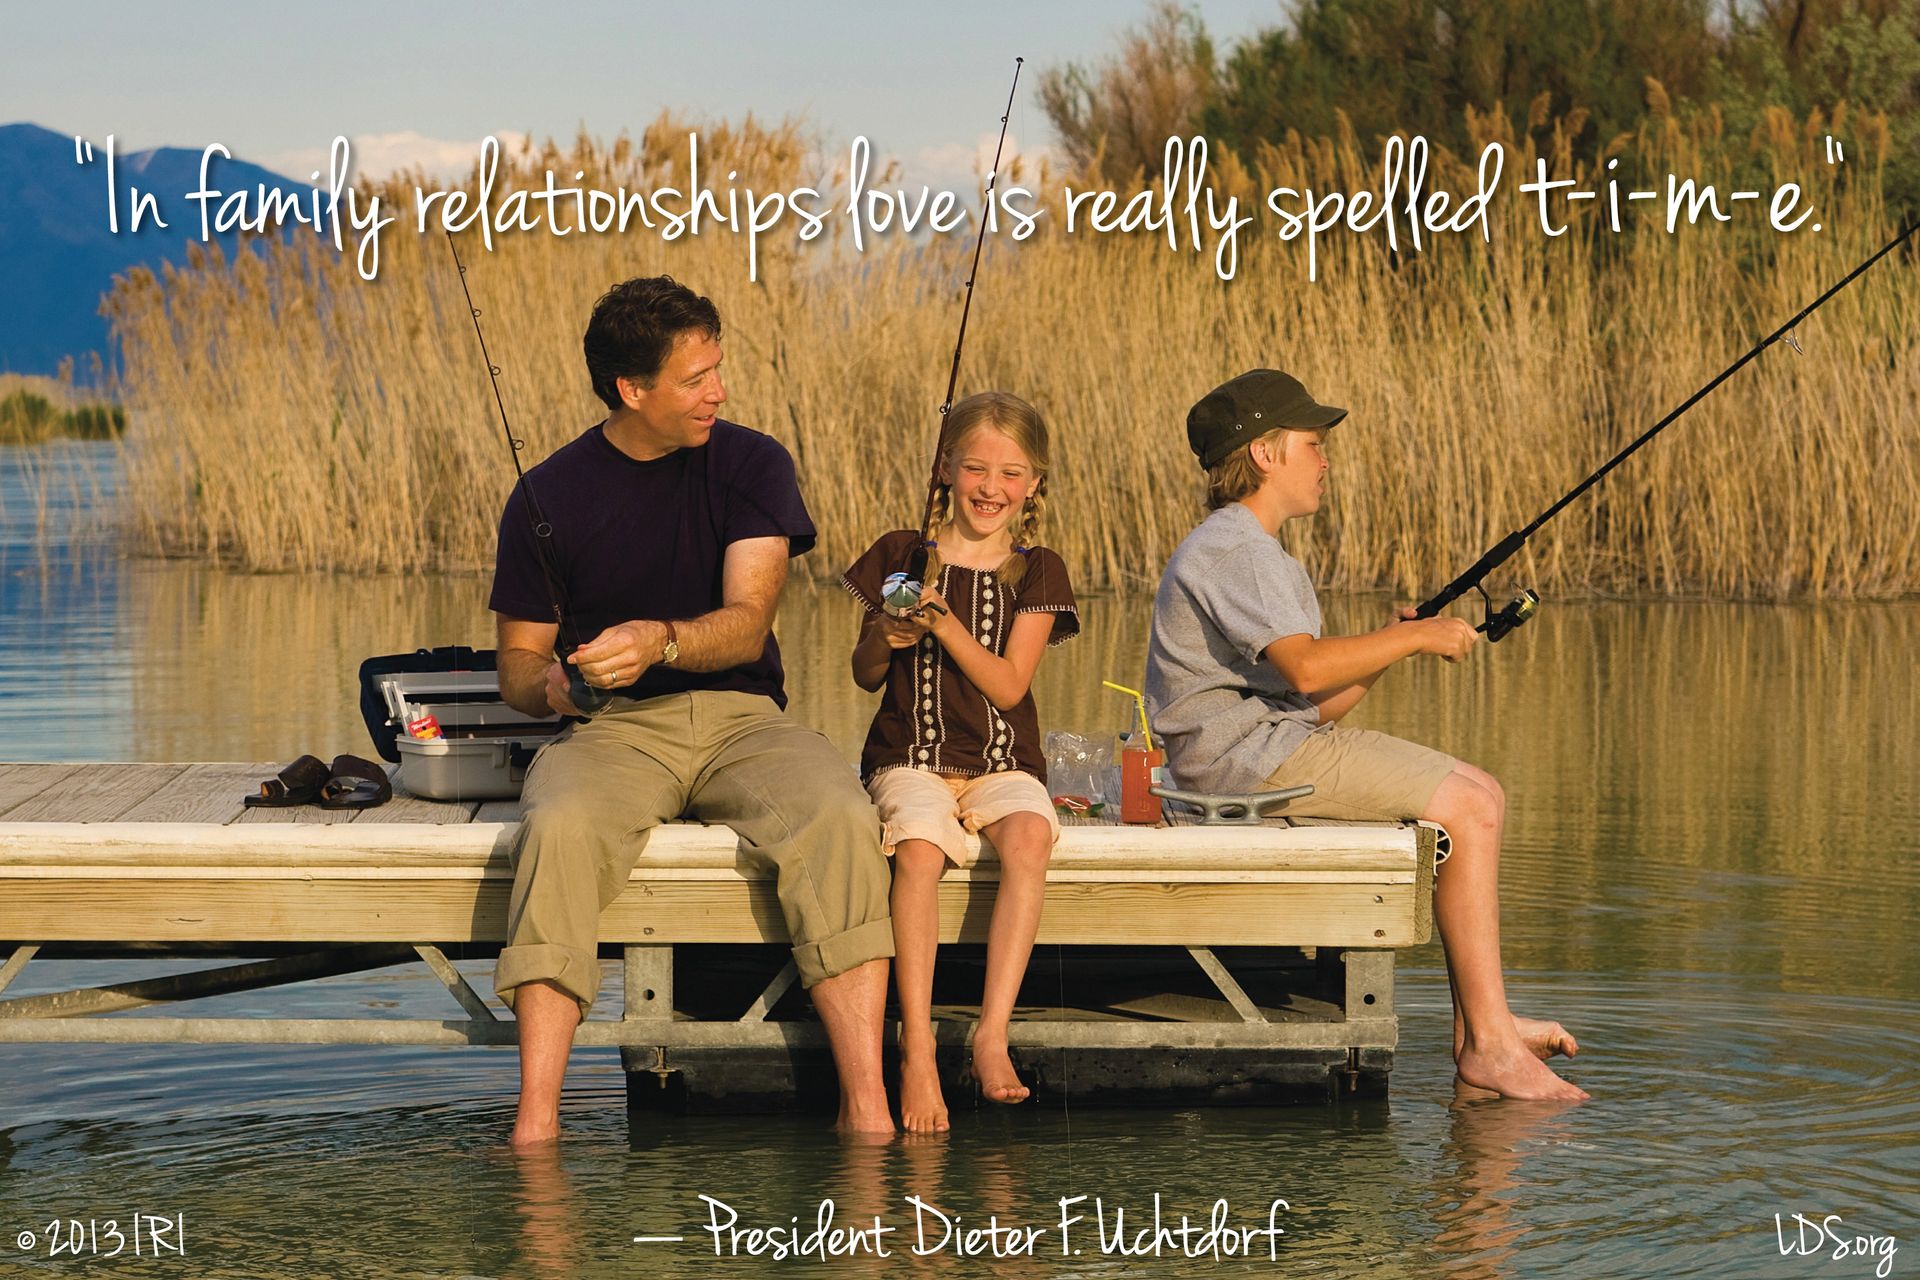 “In family relationships love is really spelled t-i-m-e.”—President Dieter F. Uchtdorf, “Of Things That Matter Most” © undefined ipCode 1.